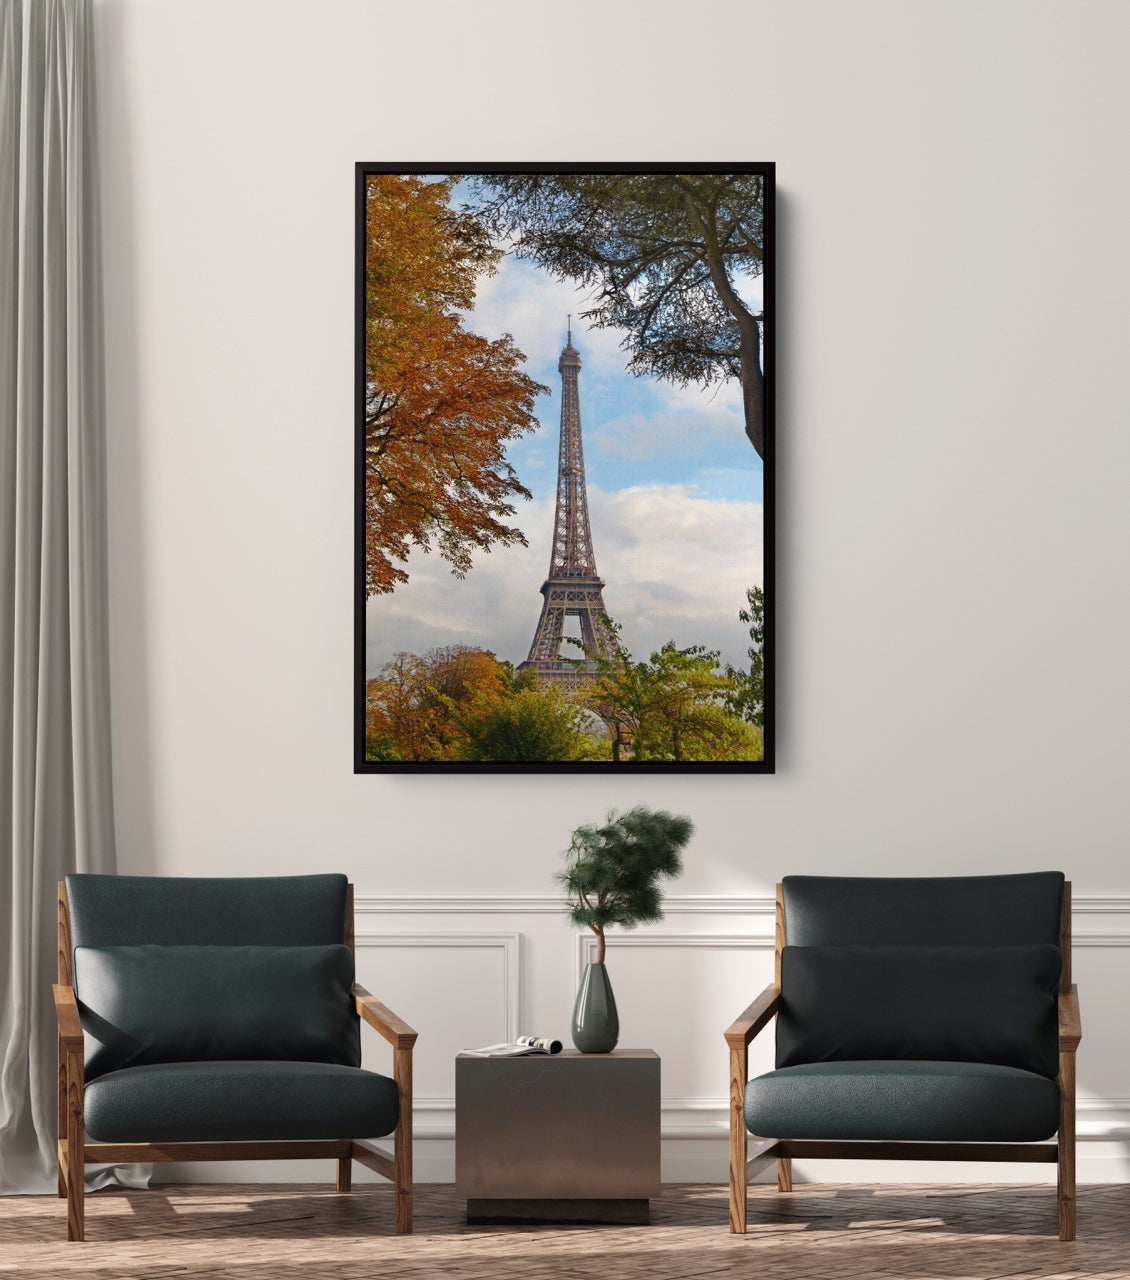 Canvas Wall Art: A Timeless Decor Trend | MK Envision Galleries